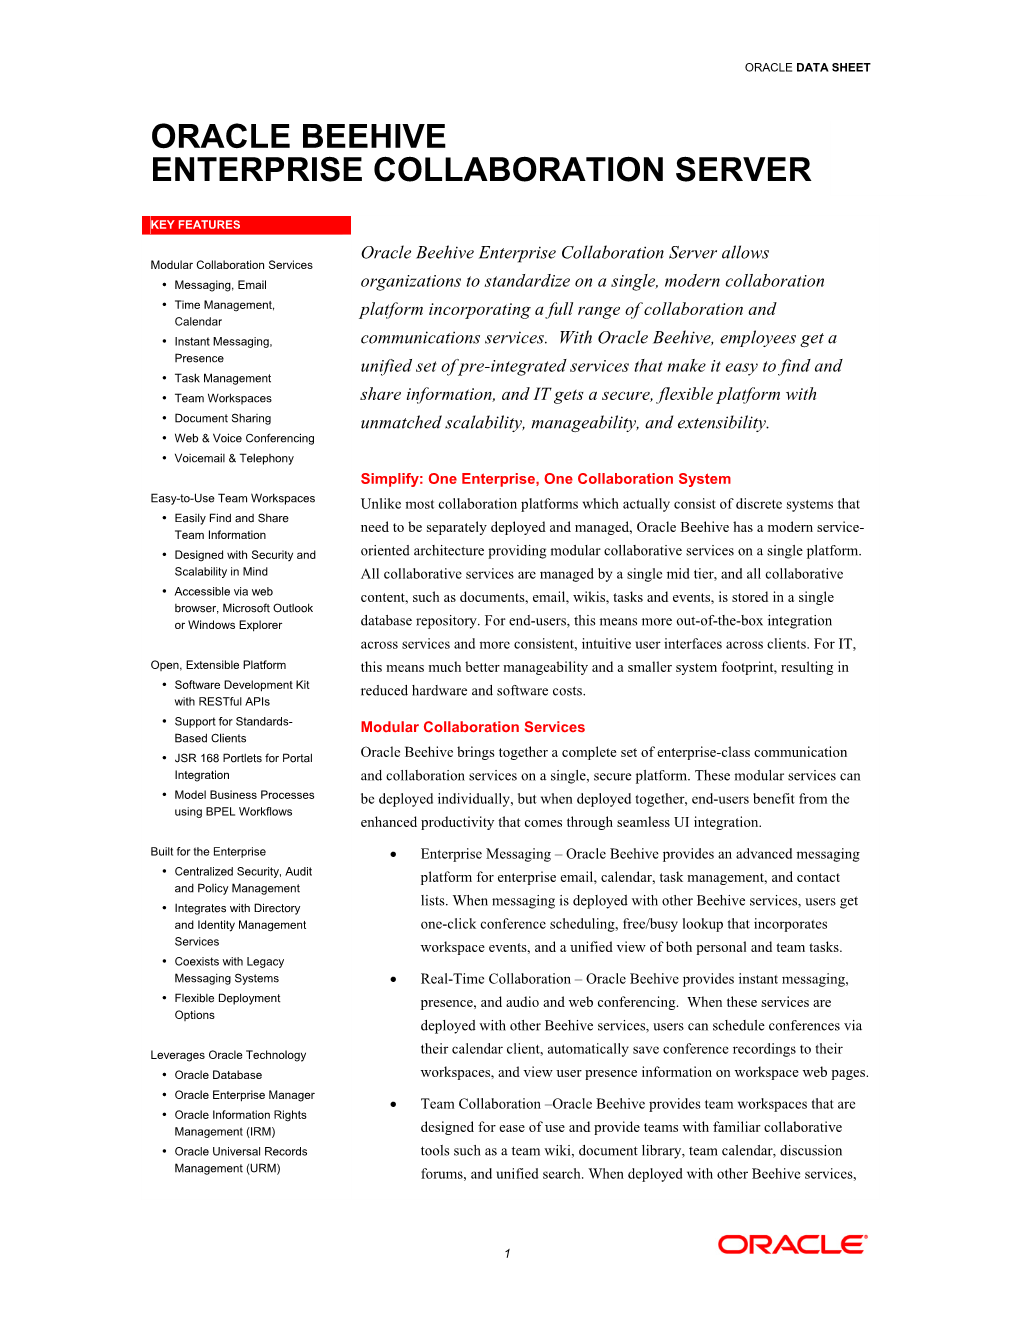 Oracle Beehive Enterprise Collaboration Software